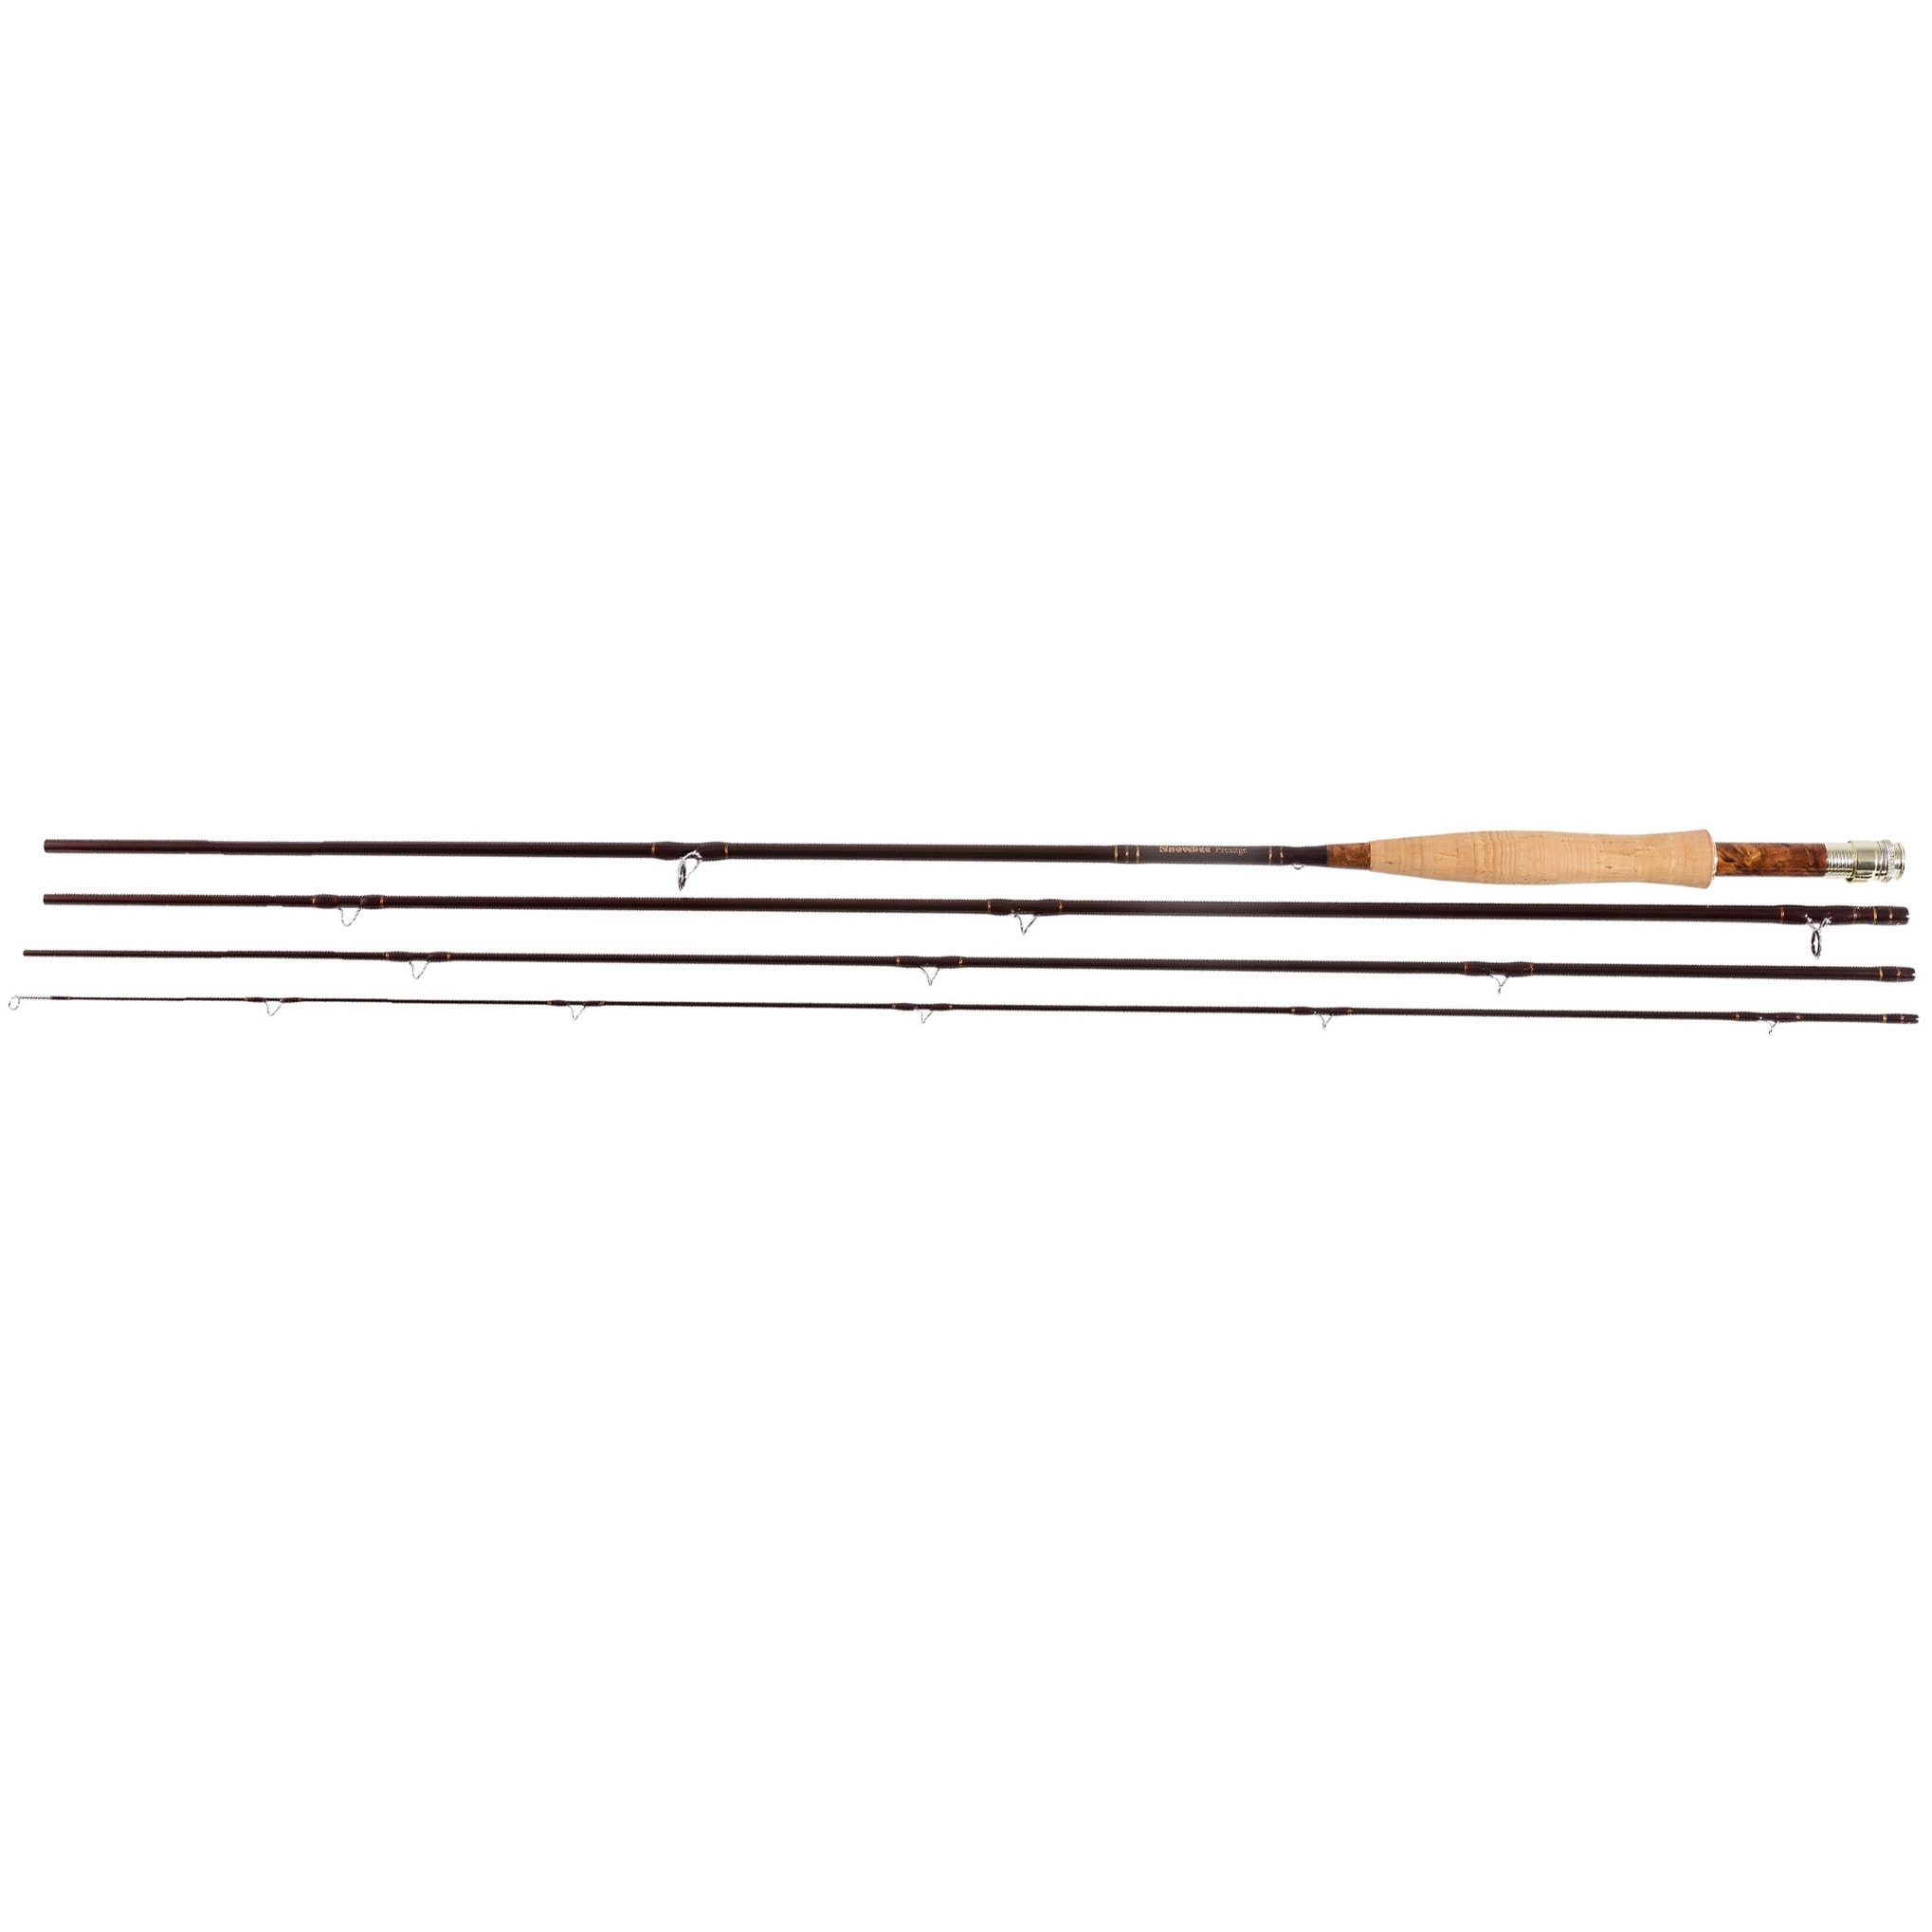 Snowbee Prestige Fly Rod - Trout Fly Fishing Rods